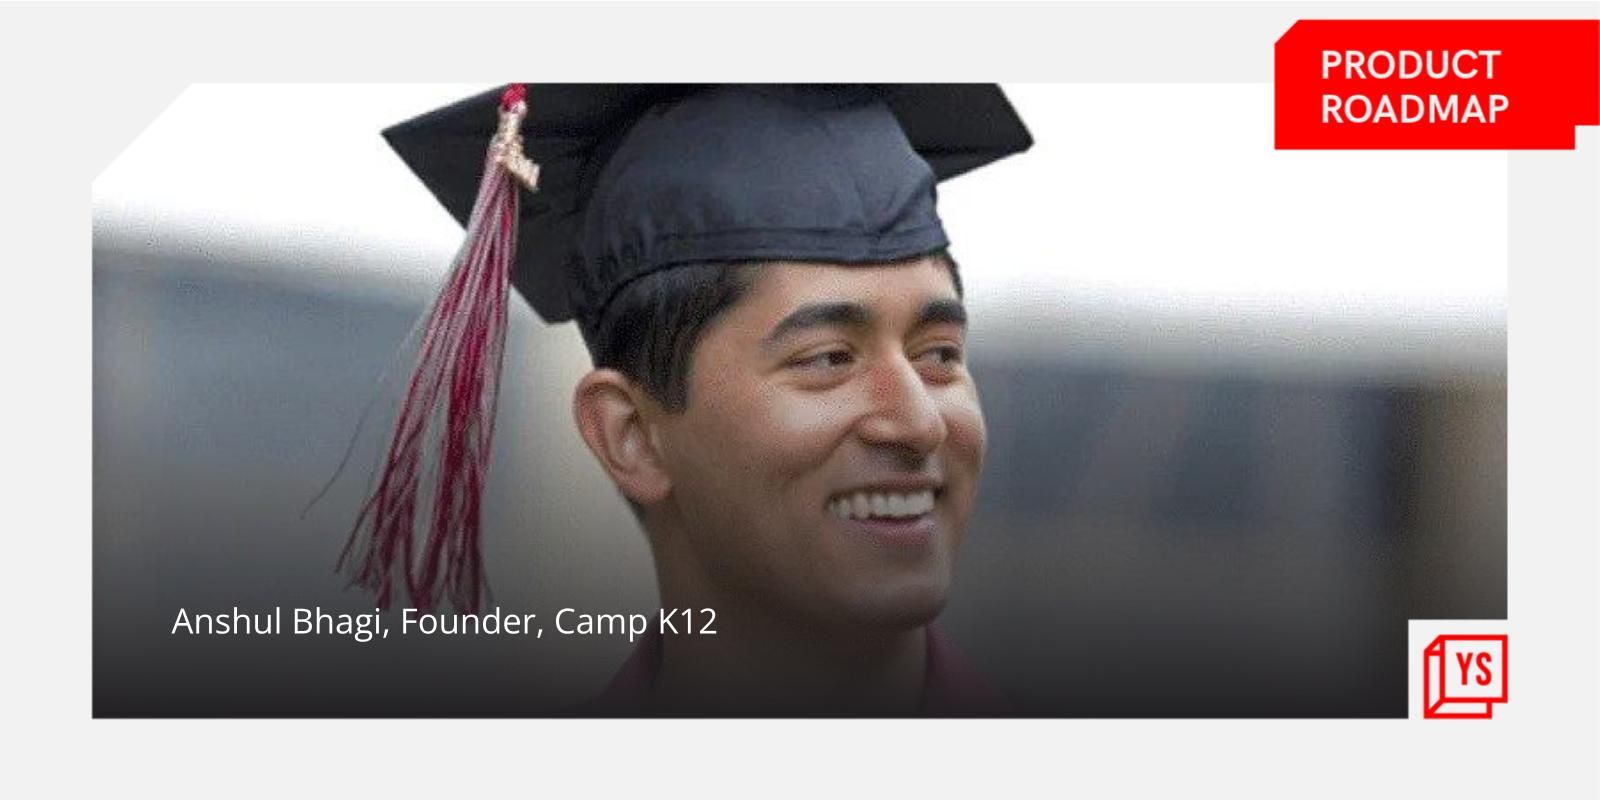 [Product Roadmap] From bootcamps to building deep tech, Camp K12 has evolved to make coding fun for children 